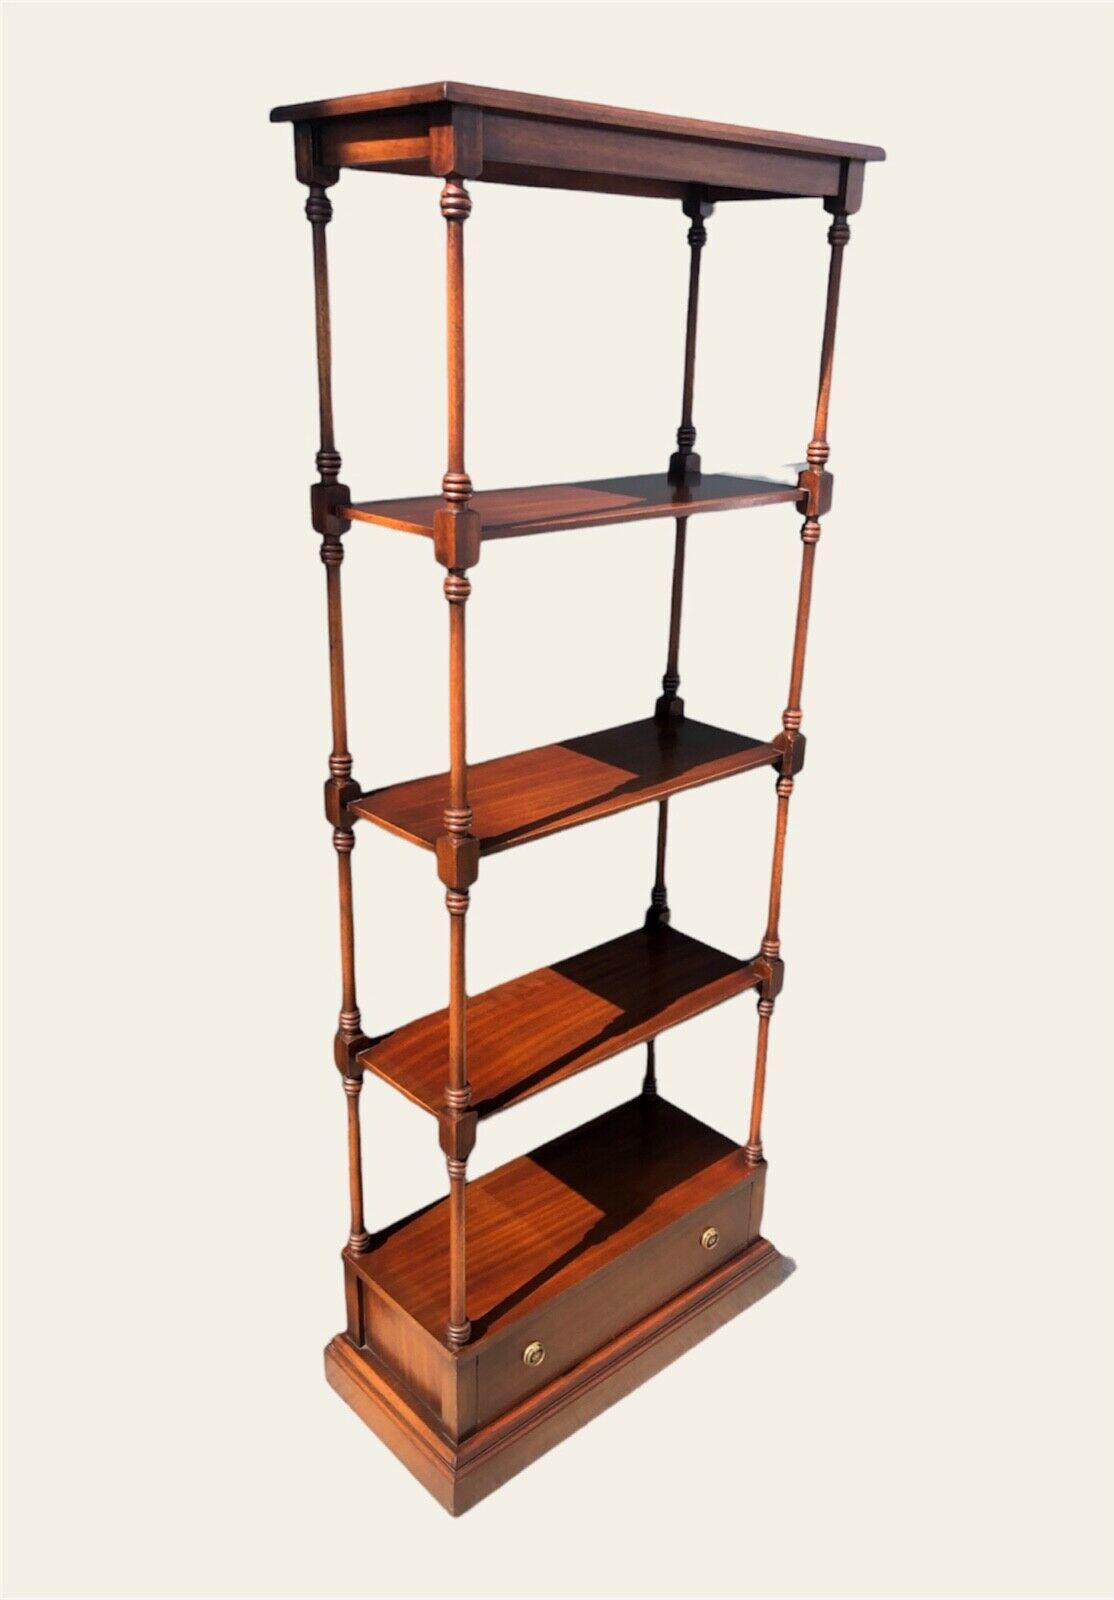 000975.....Vintage Reprodux Mahogany Shelving Unit With Drawer ( sold ...